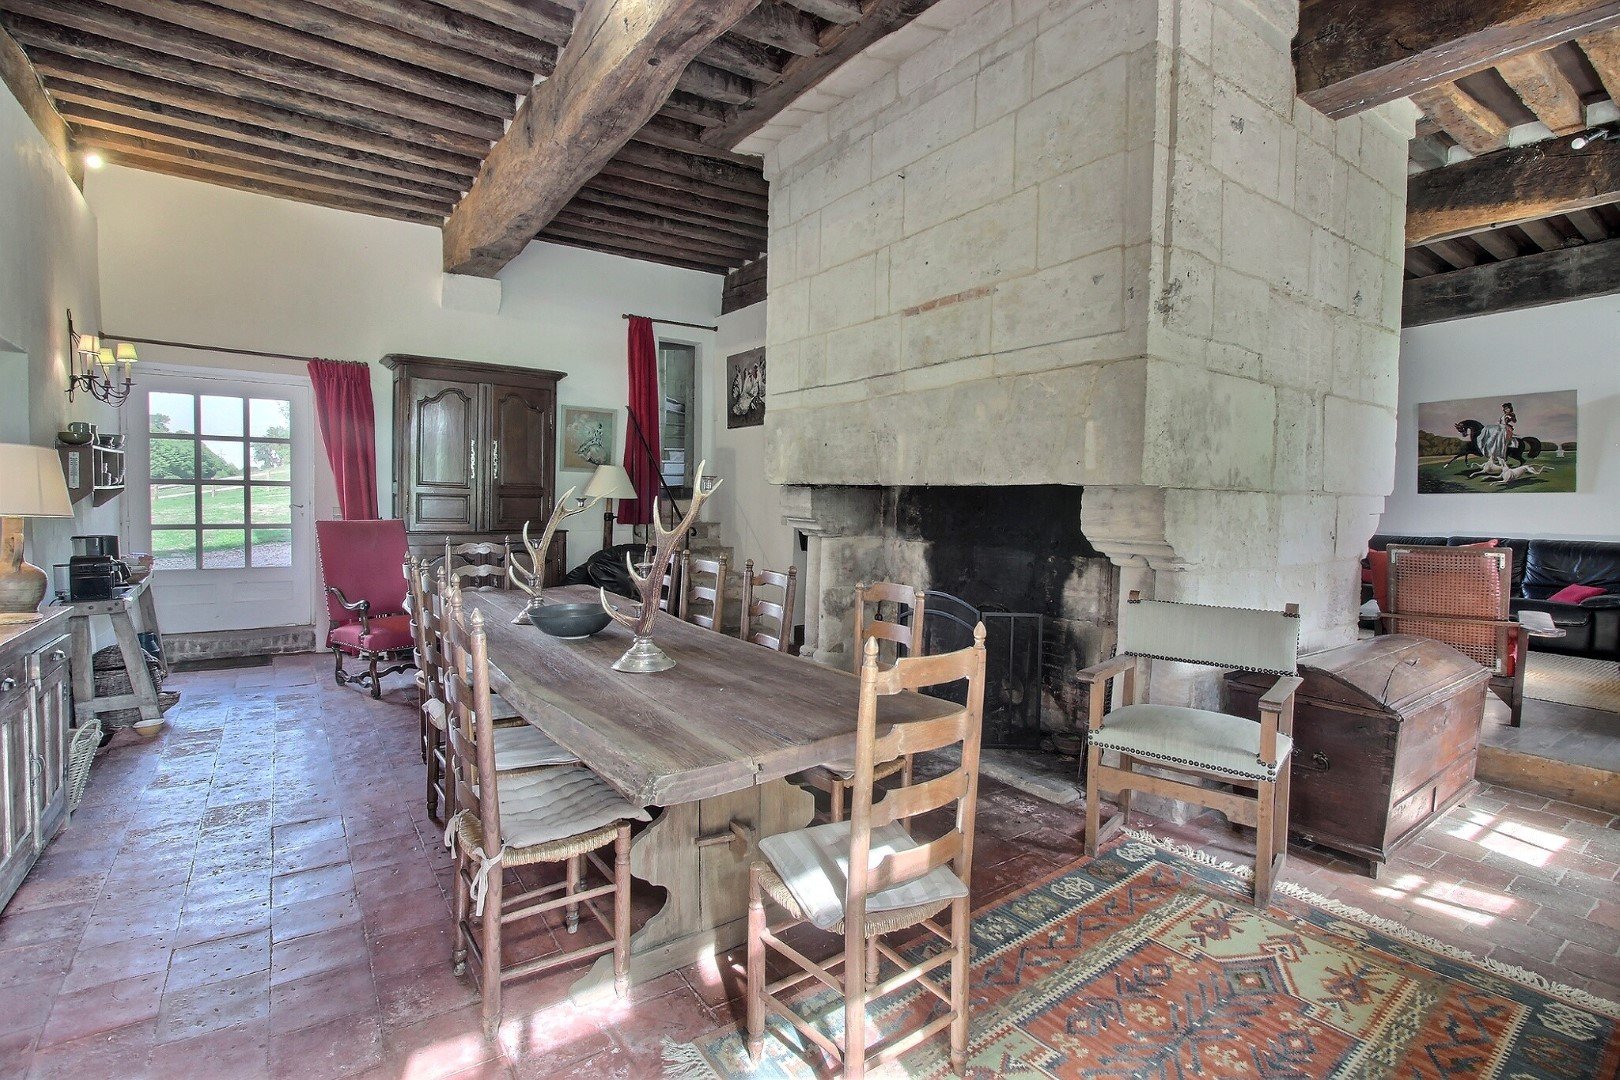 Francis York 18th Century Cider Press Converted into a French Country Home in Normandy 21.jpg